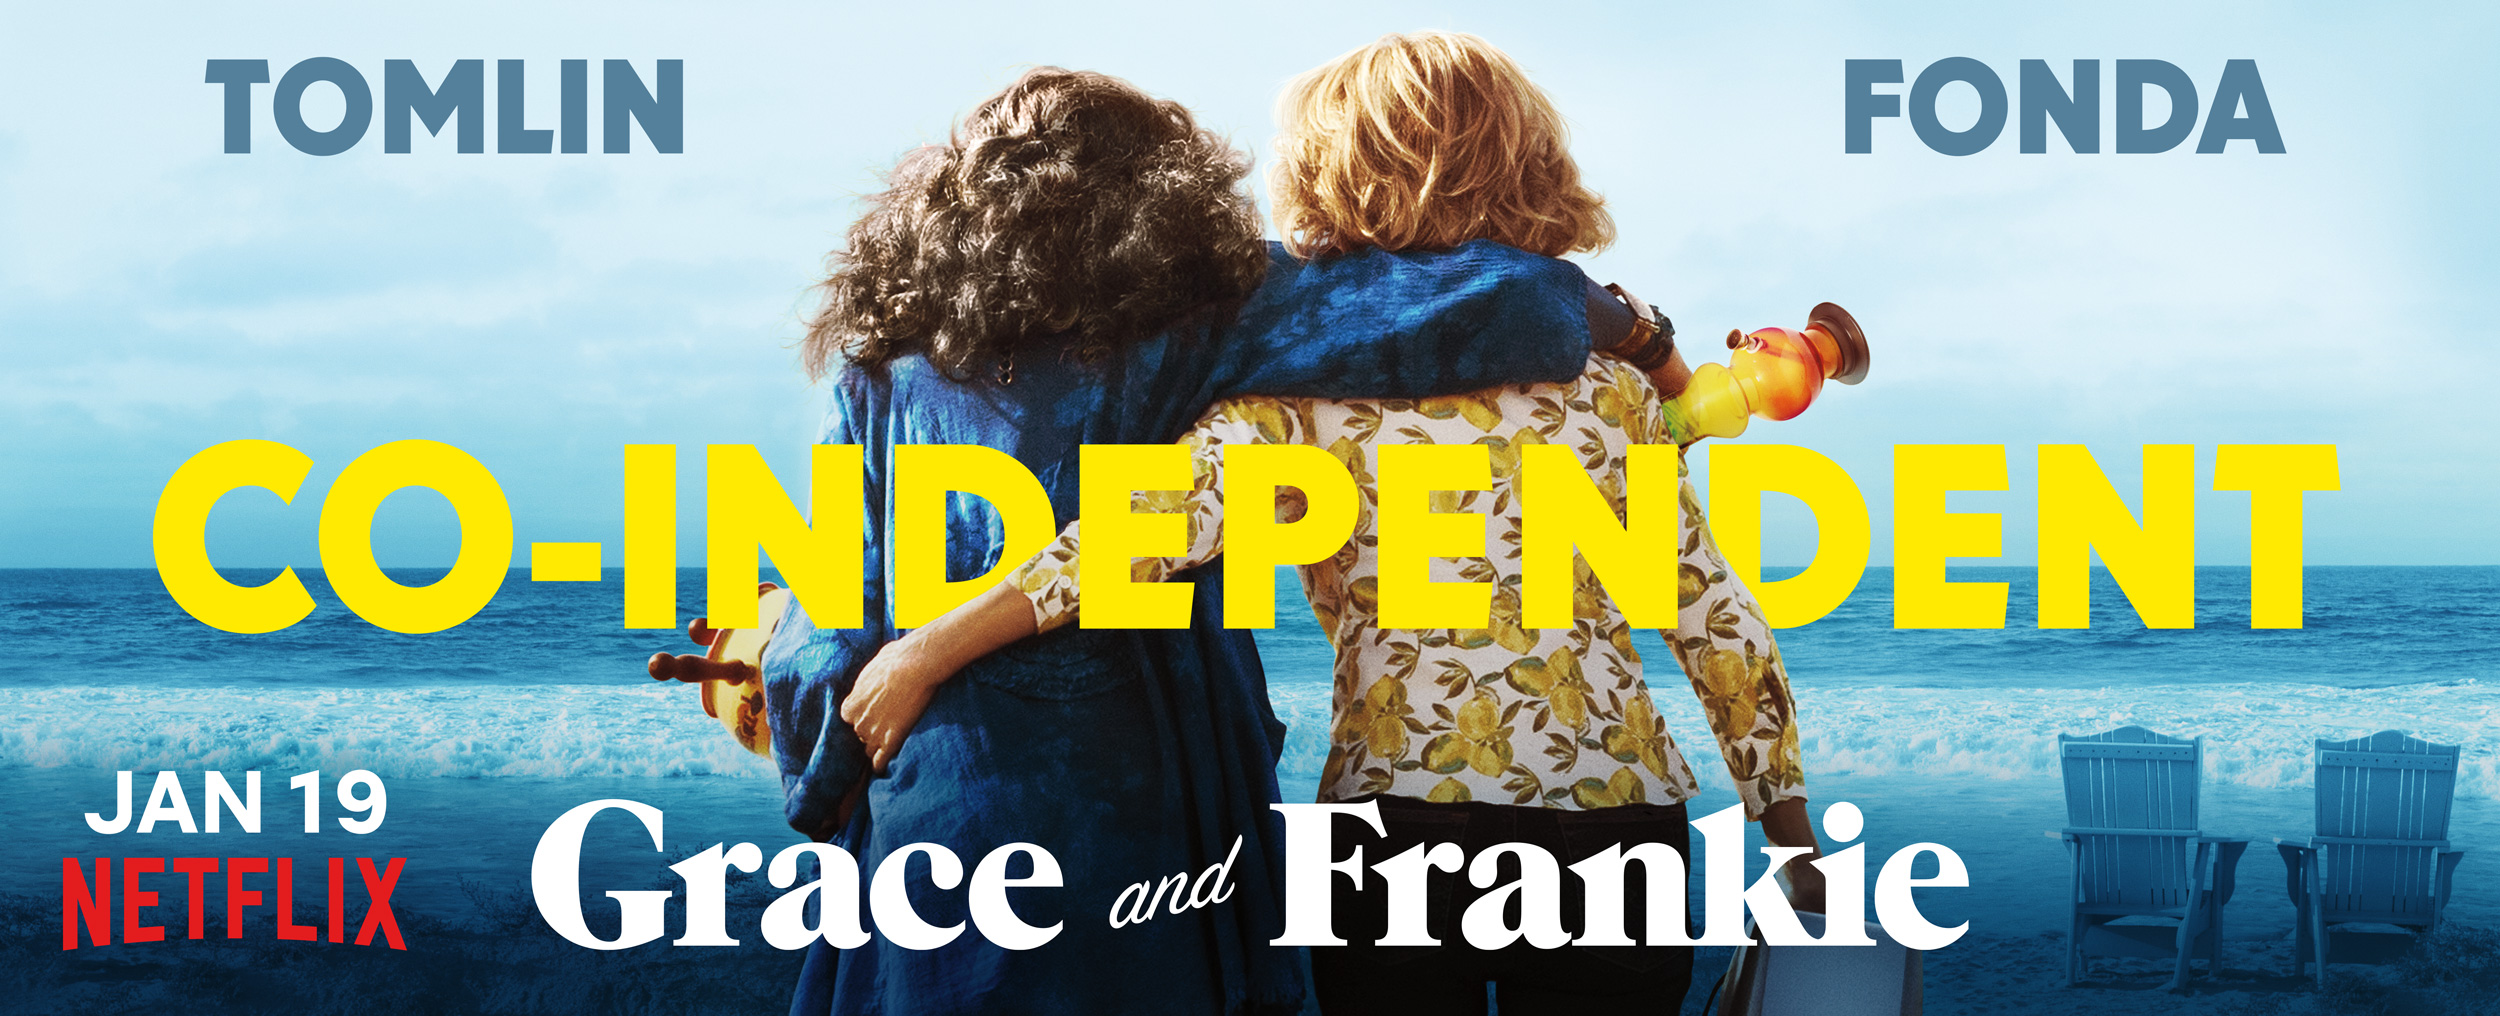 Promotional material for season 4 of 'Grace and Frankie''